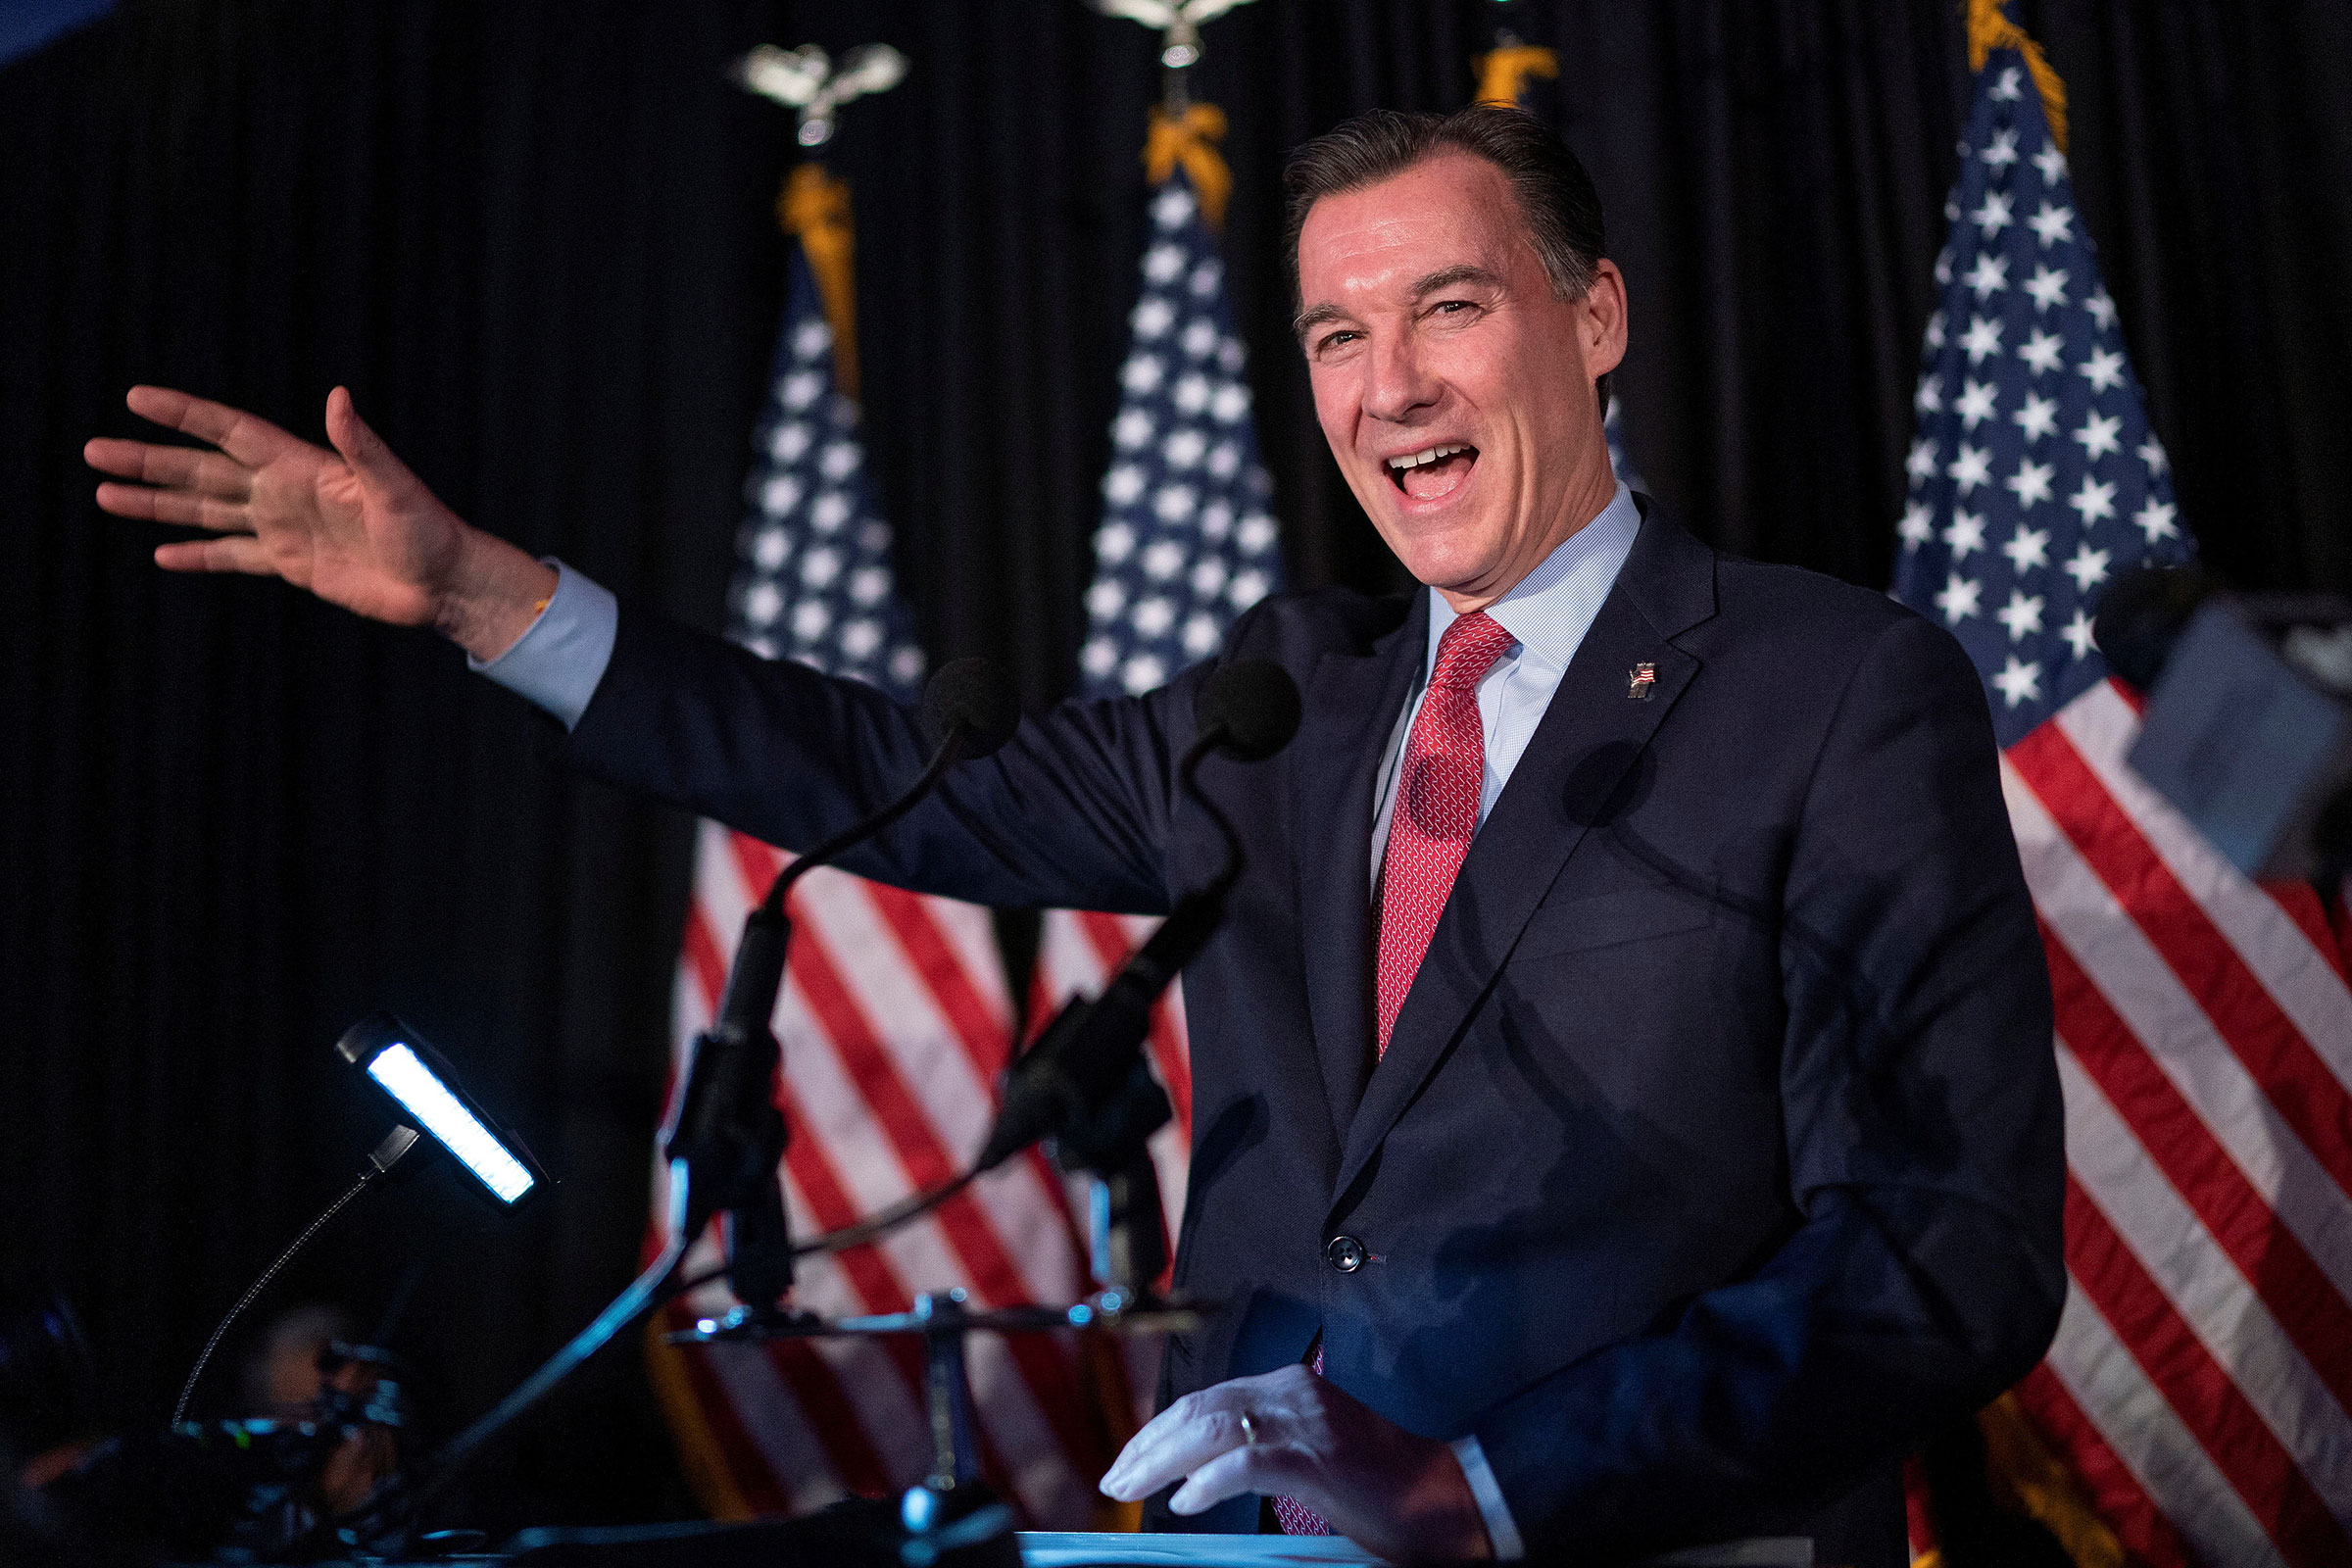 Suozzi delivers his victory speech during his election night party in Woodbury, New York, on February 13.